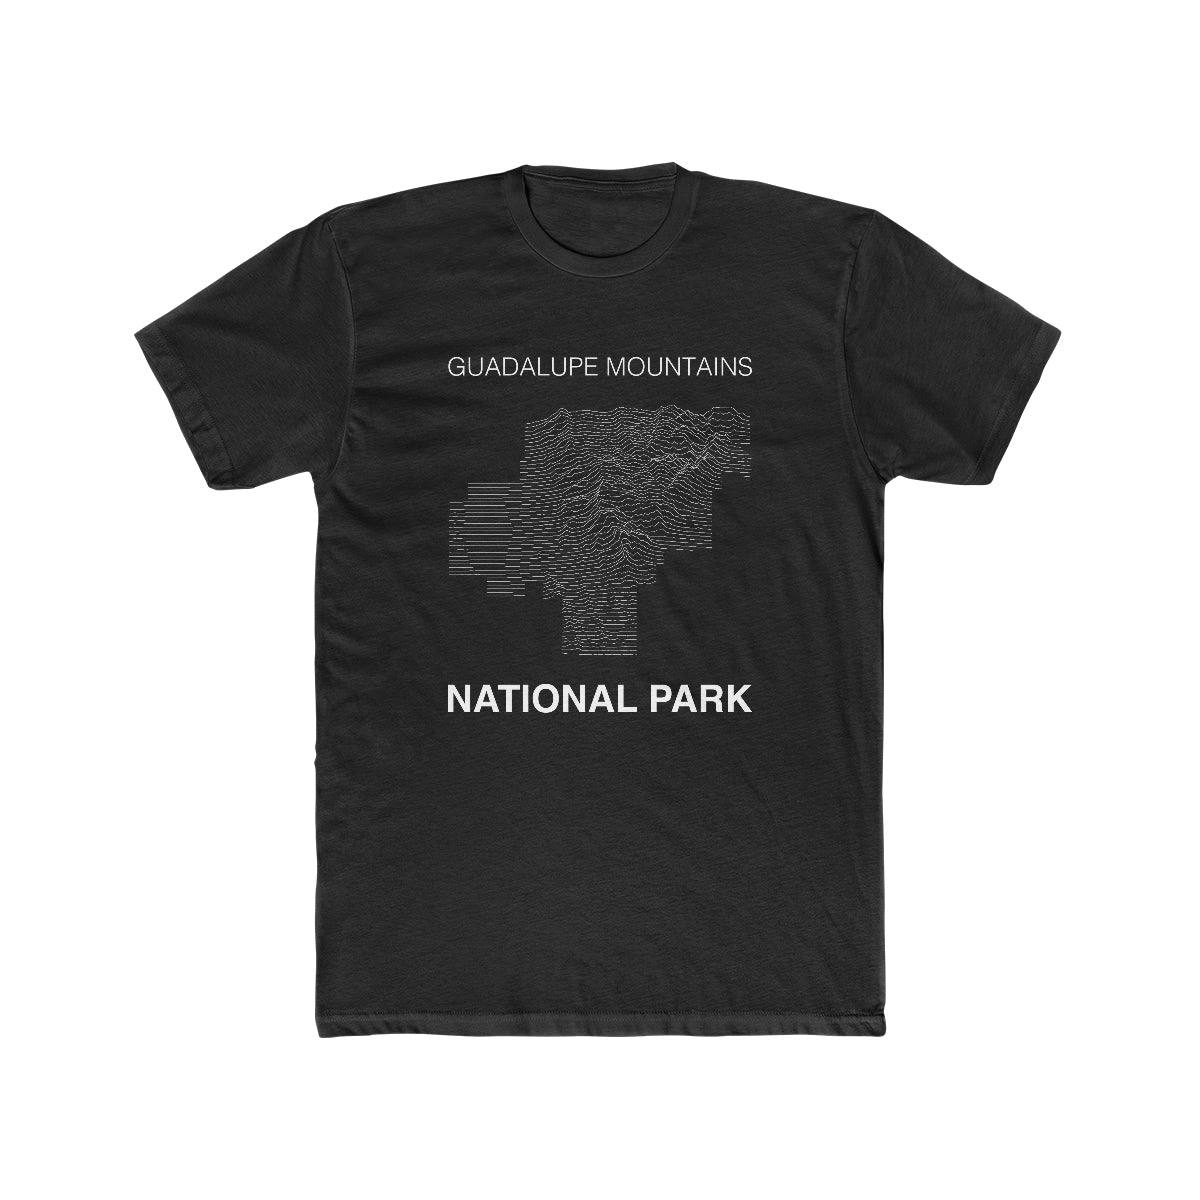 Guadalupe Mountains National Park T-Shirt Lines